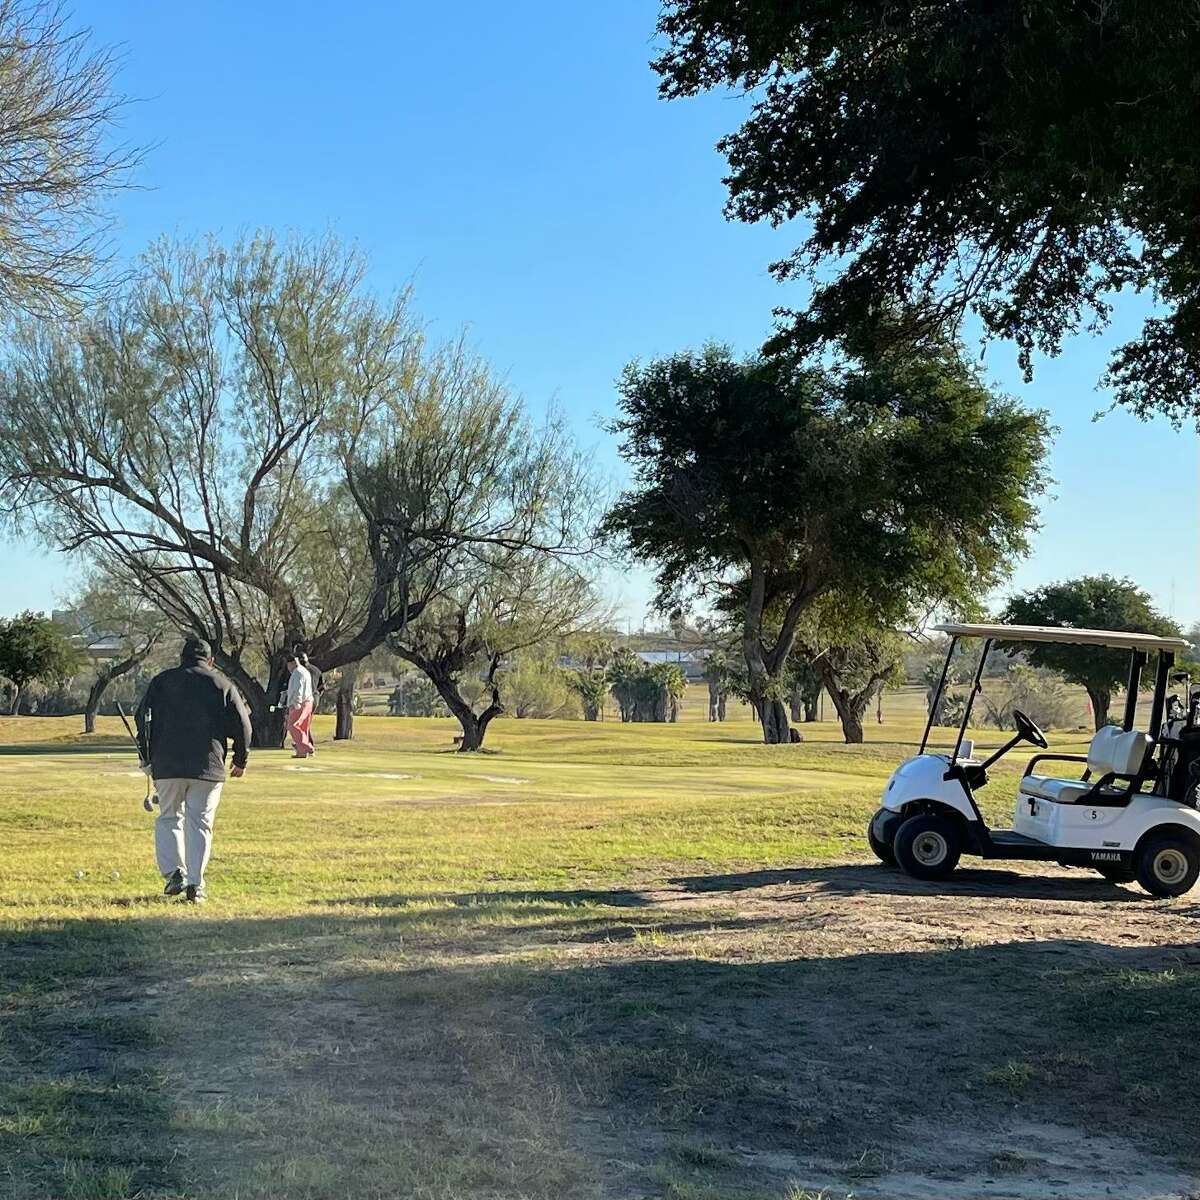 Recently the Zapata County Chamber of Commerce held its First Golf Tournament and Beer Tasting at Los Ebanos Golf Course to initiate fundraising activities that would do more for the Zapata business community.